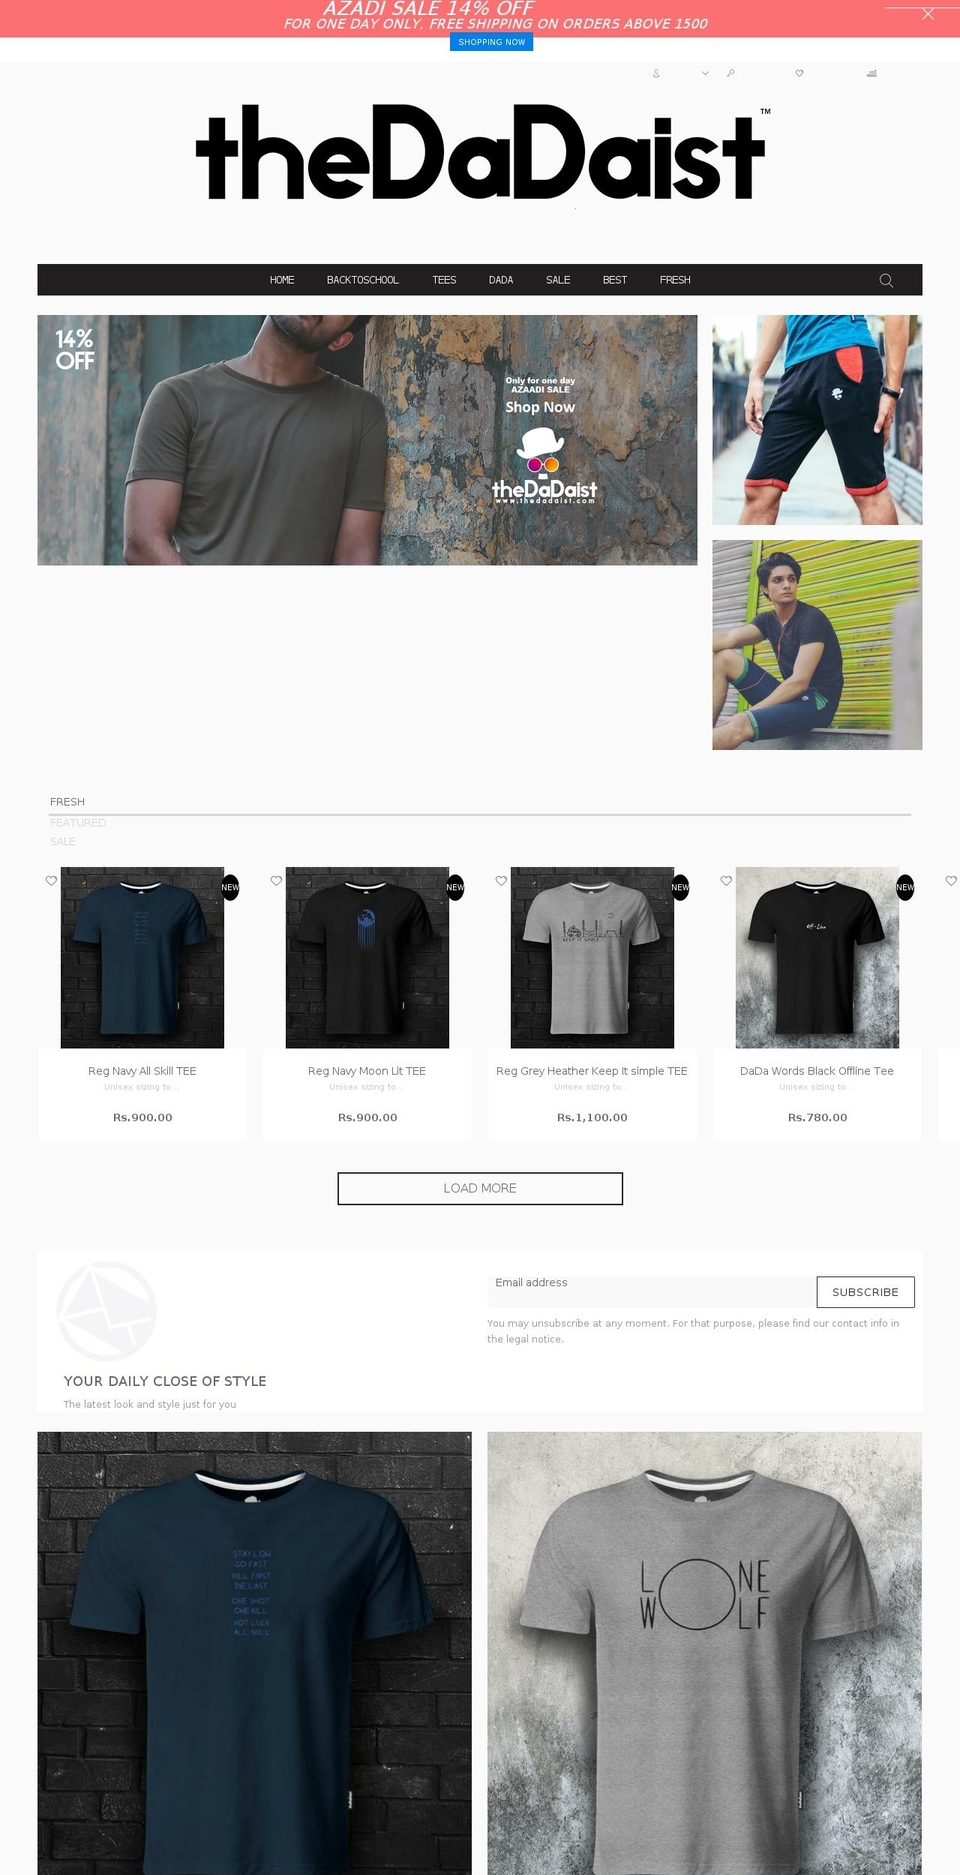 fastest-accessories-v1-1-9 Shopify theme site example thedadaiststore.com